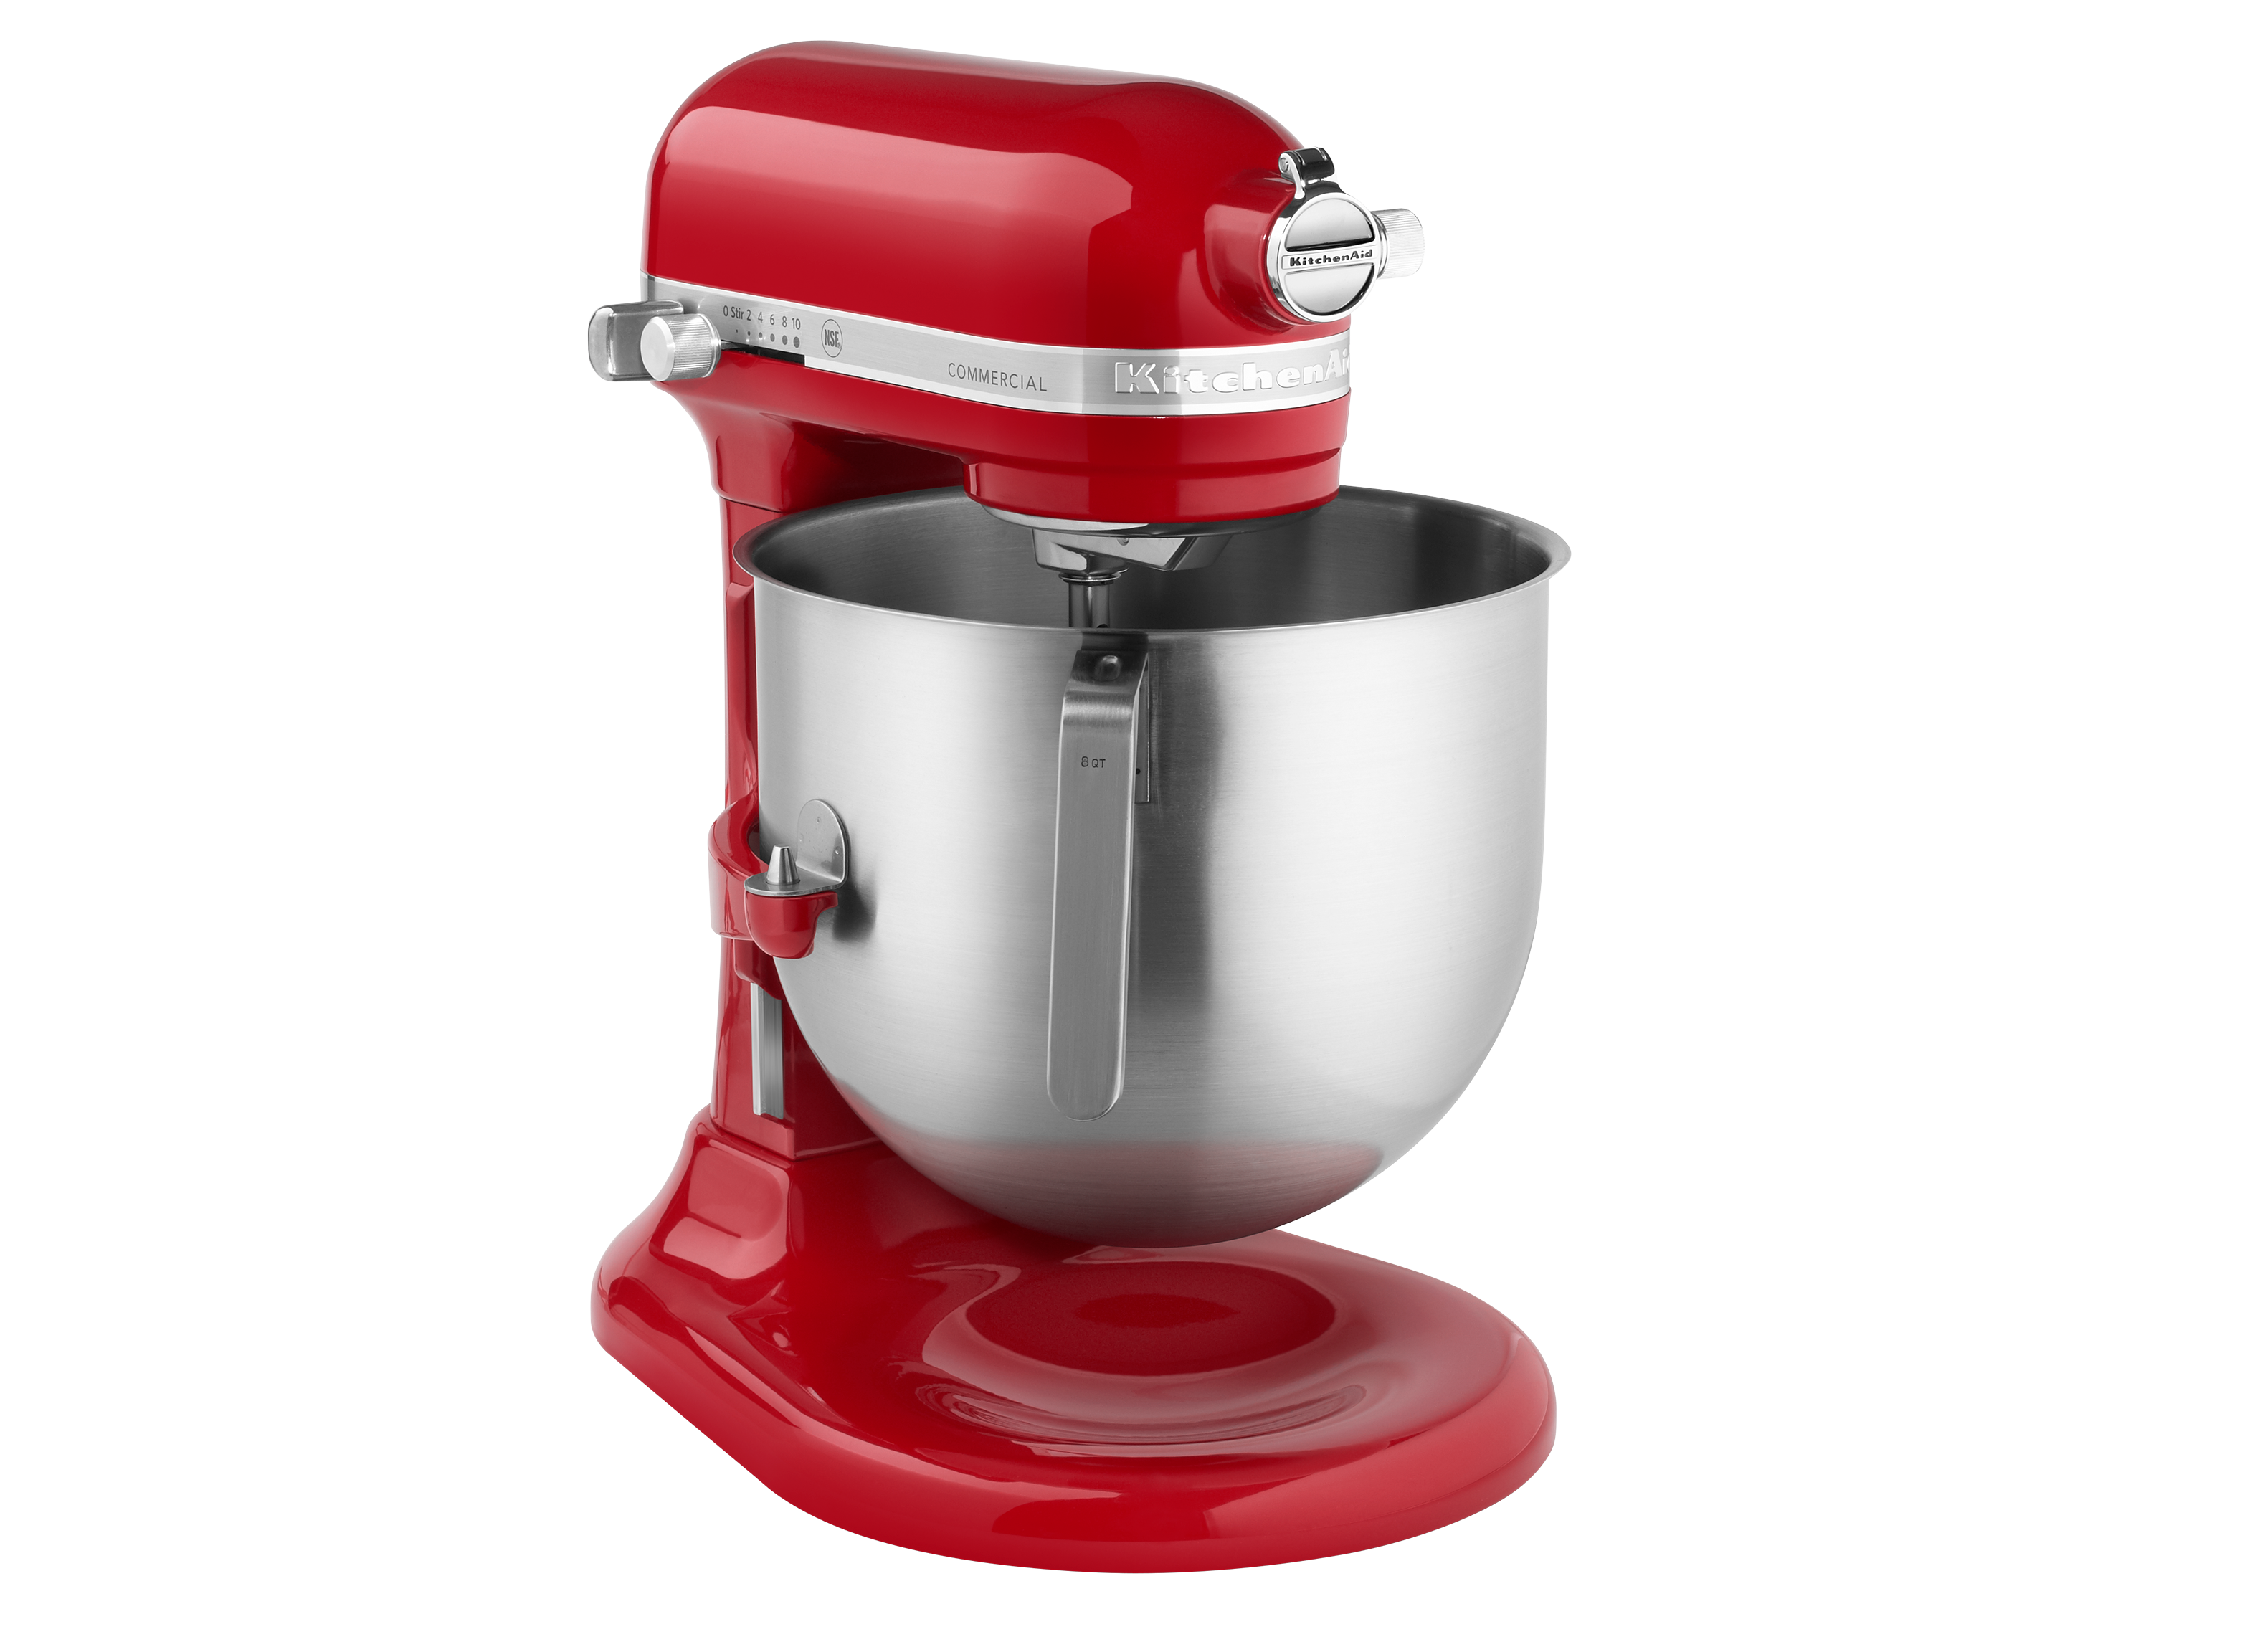 https://crdms.images.consumerreports.org/prod/products/cr/models/406943-stand-mixers-kitchenaid-commercial-series-ksm8990er-10030120.png